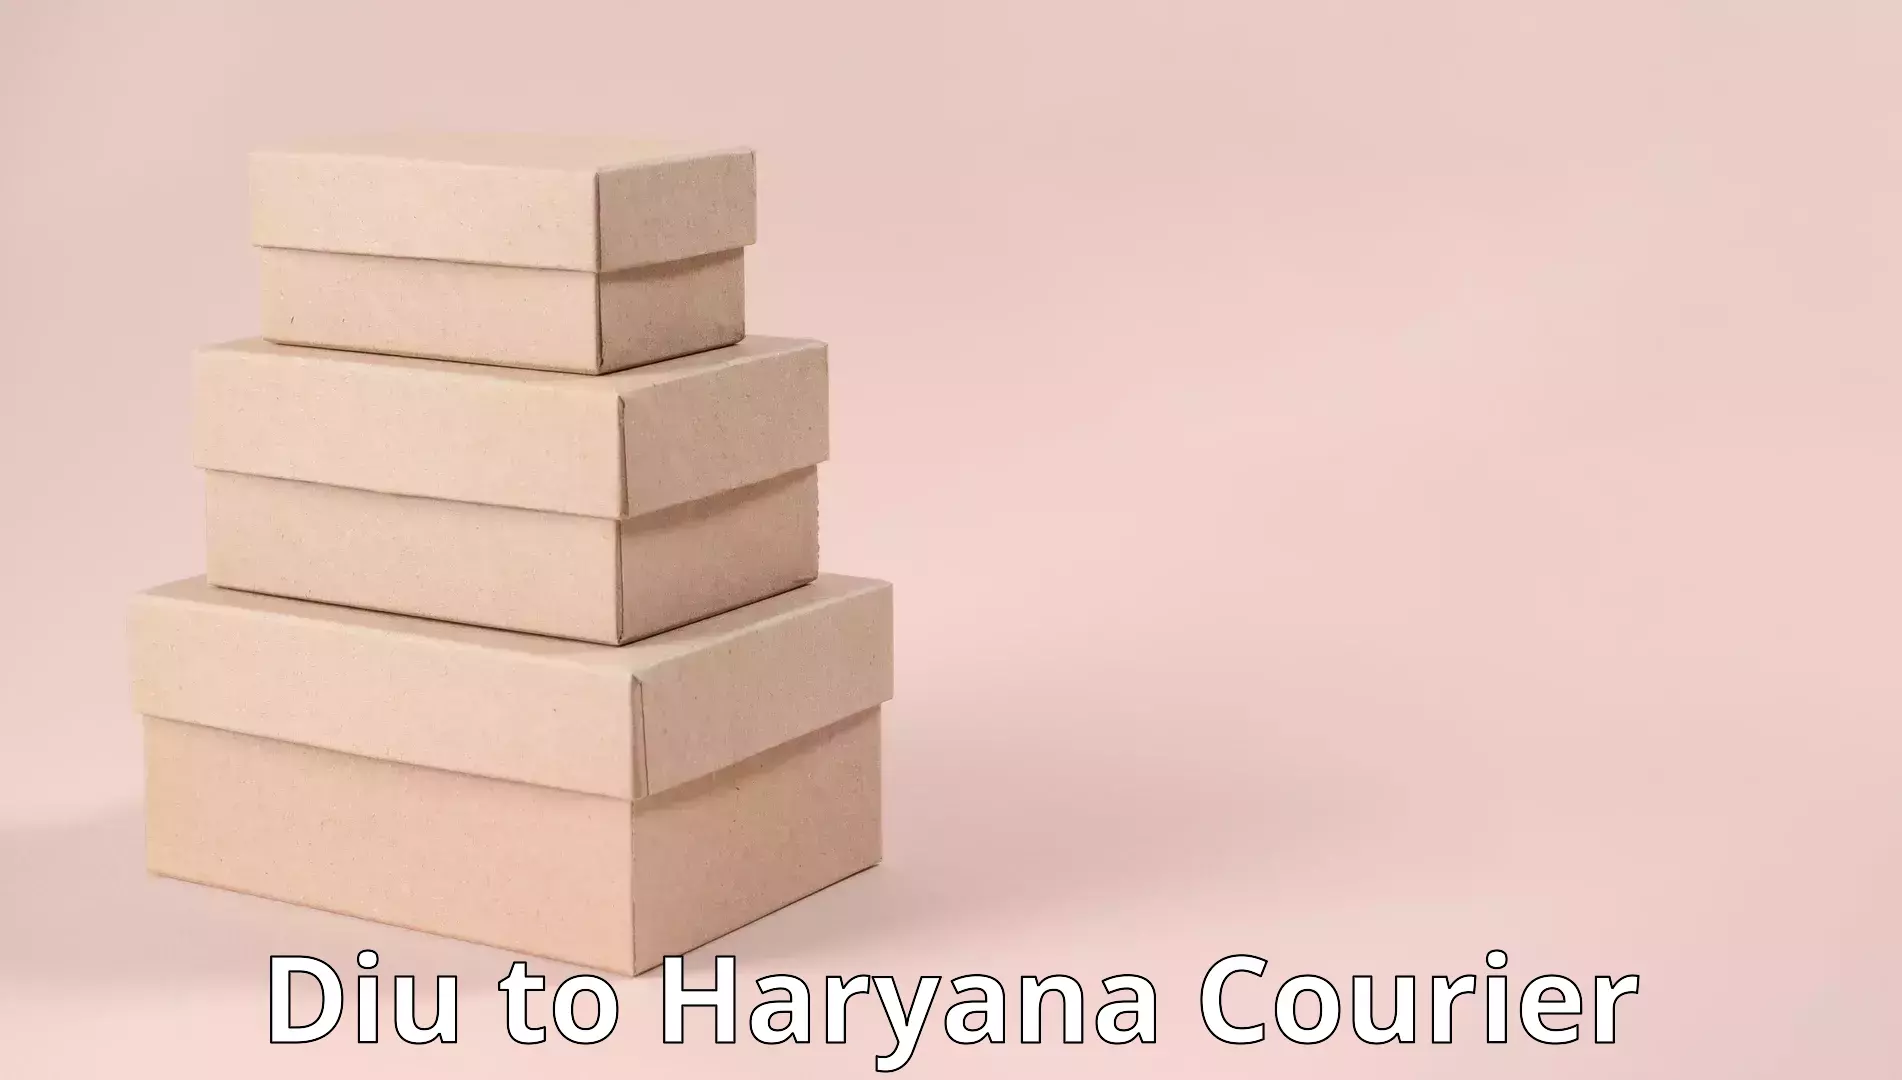 Furniture delivery service Diu to Haryana